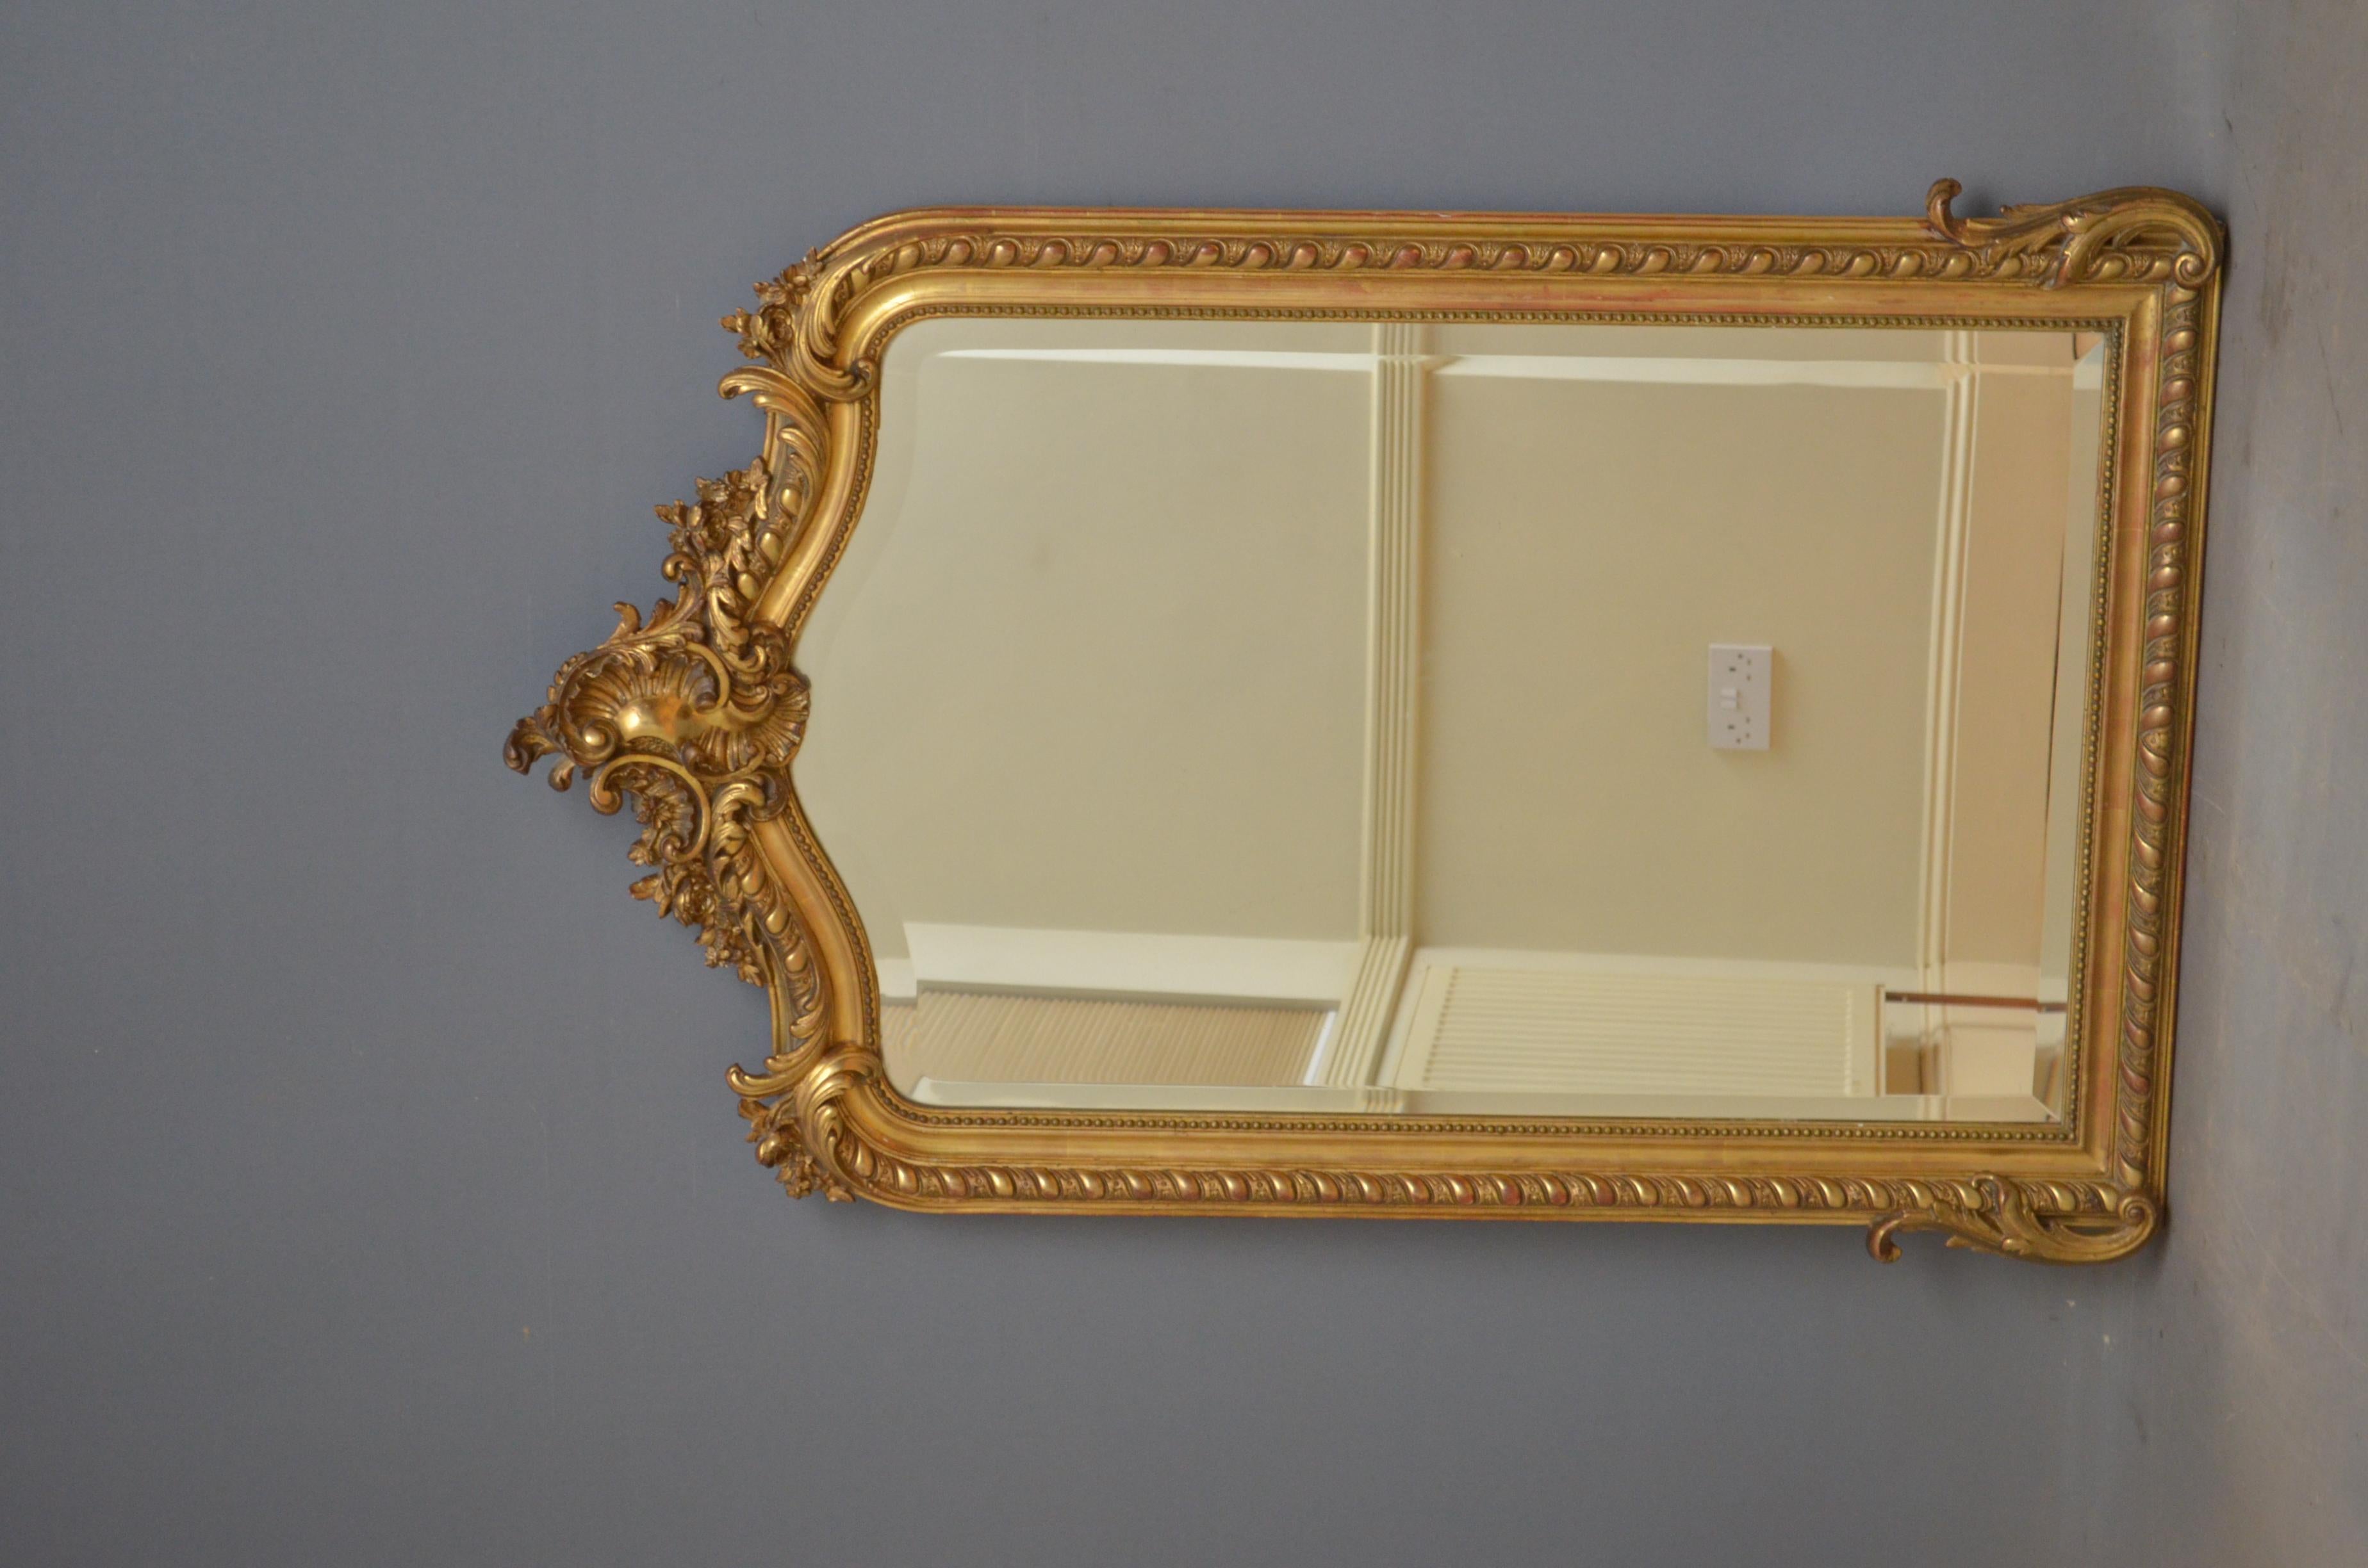 Sn4599 19th century French gilded mirror, having bevelled edge glass in finely decorated giltwood frame. This antique mirror retains its original glass with some foxing, original gilt and original backboards, all in home ready condition, circa